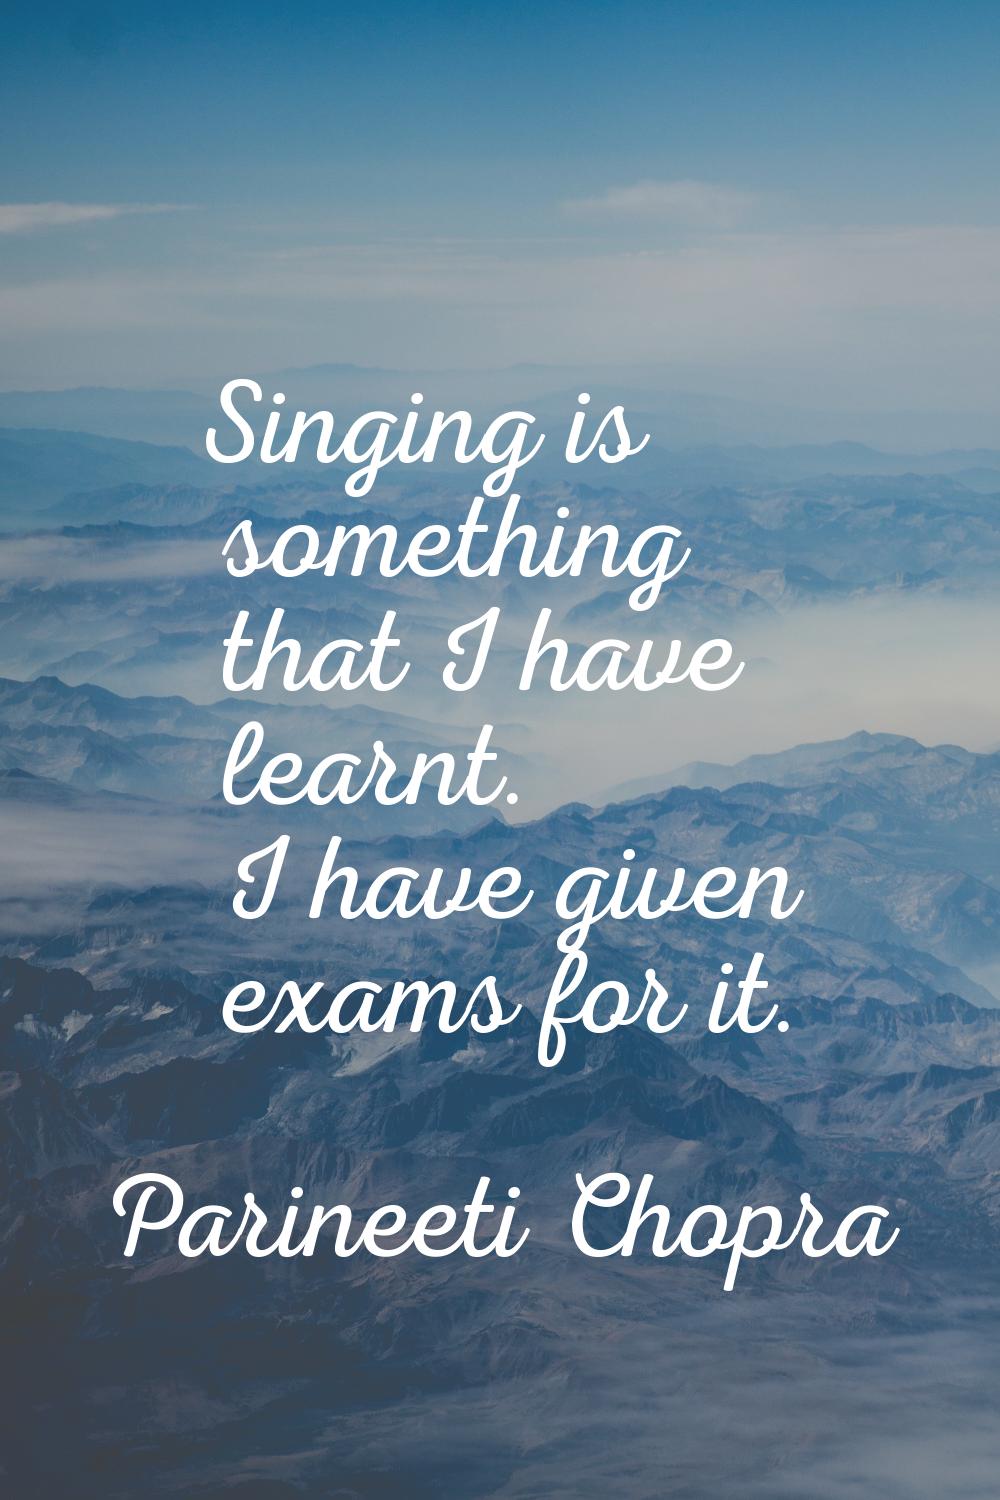 Singing is something that I have learnt. I have given exams for it.